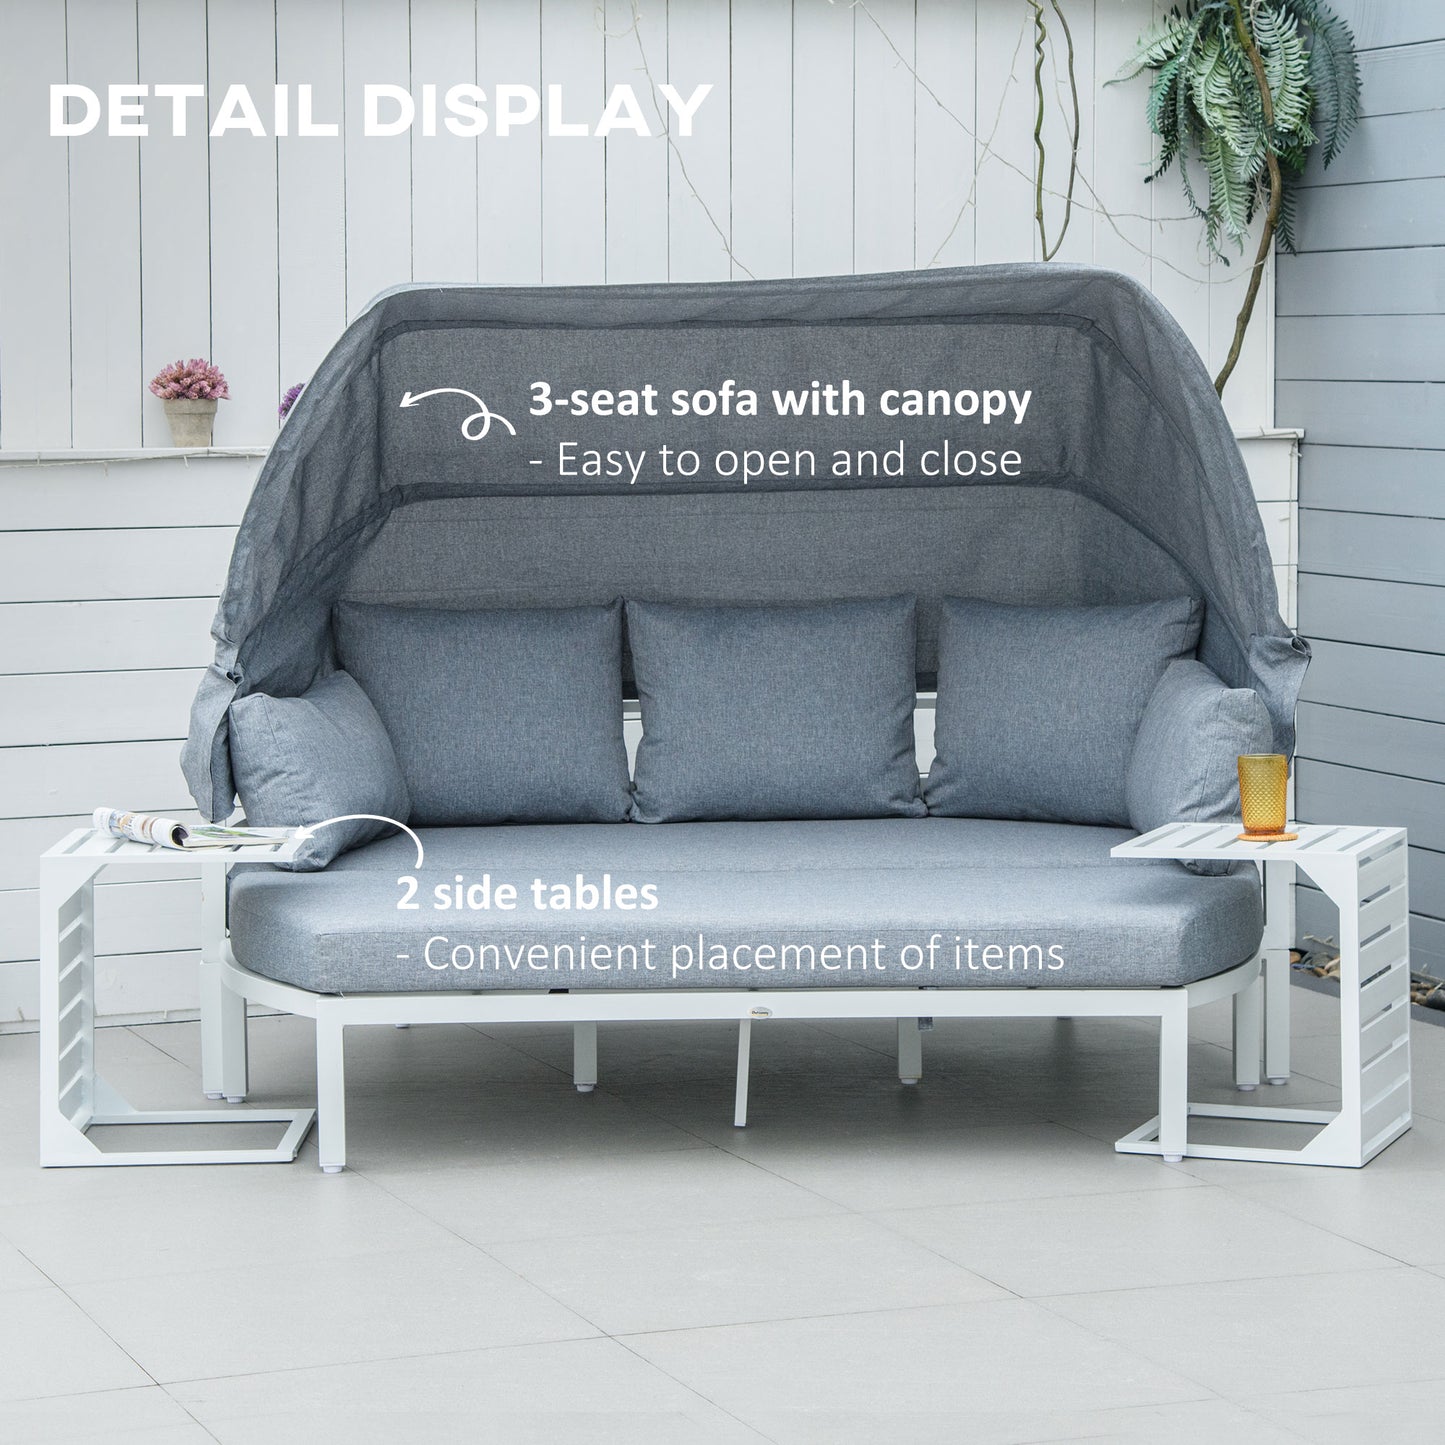 Outsunny 4 Pieces Outdoor Garden Sofa Set, Aluminum Patio Lounge Bed Furniture Set, with Canopy, Padded Cushions & Side Tables, White